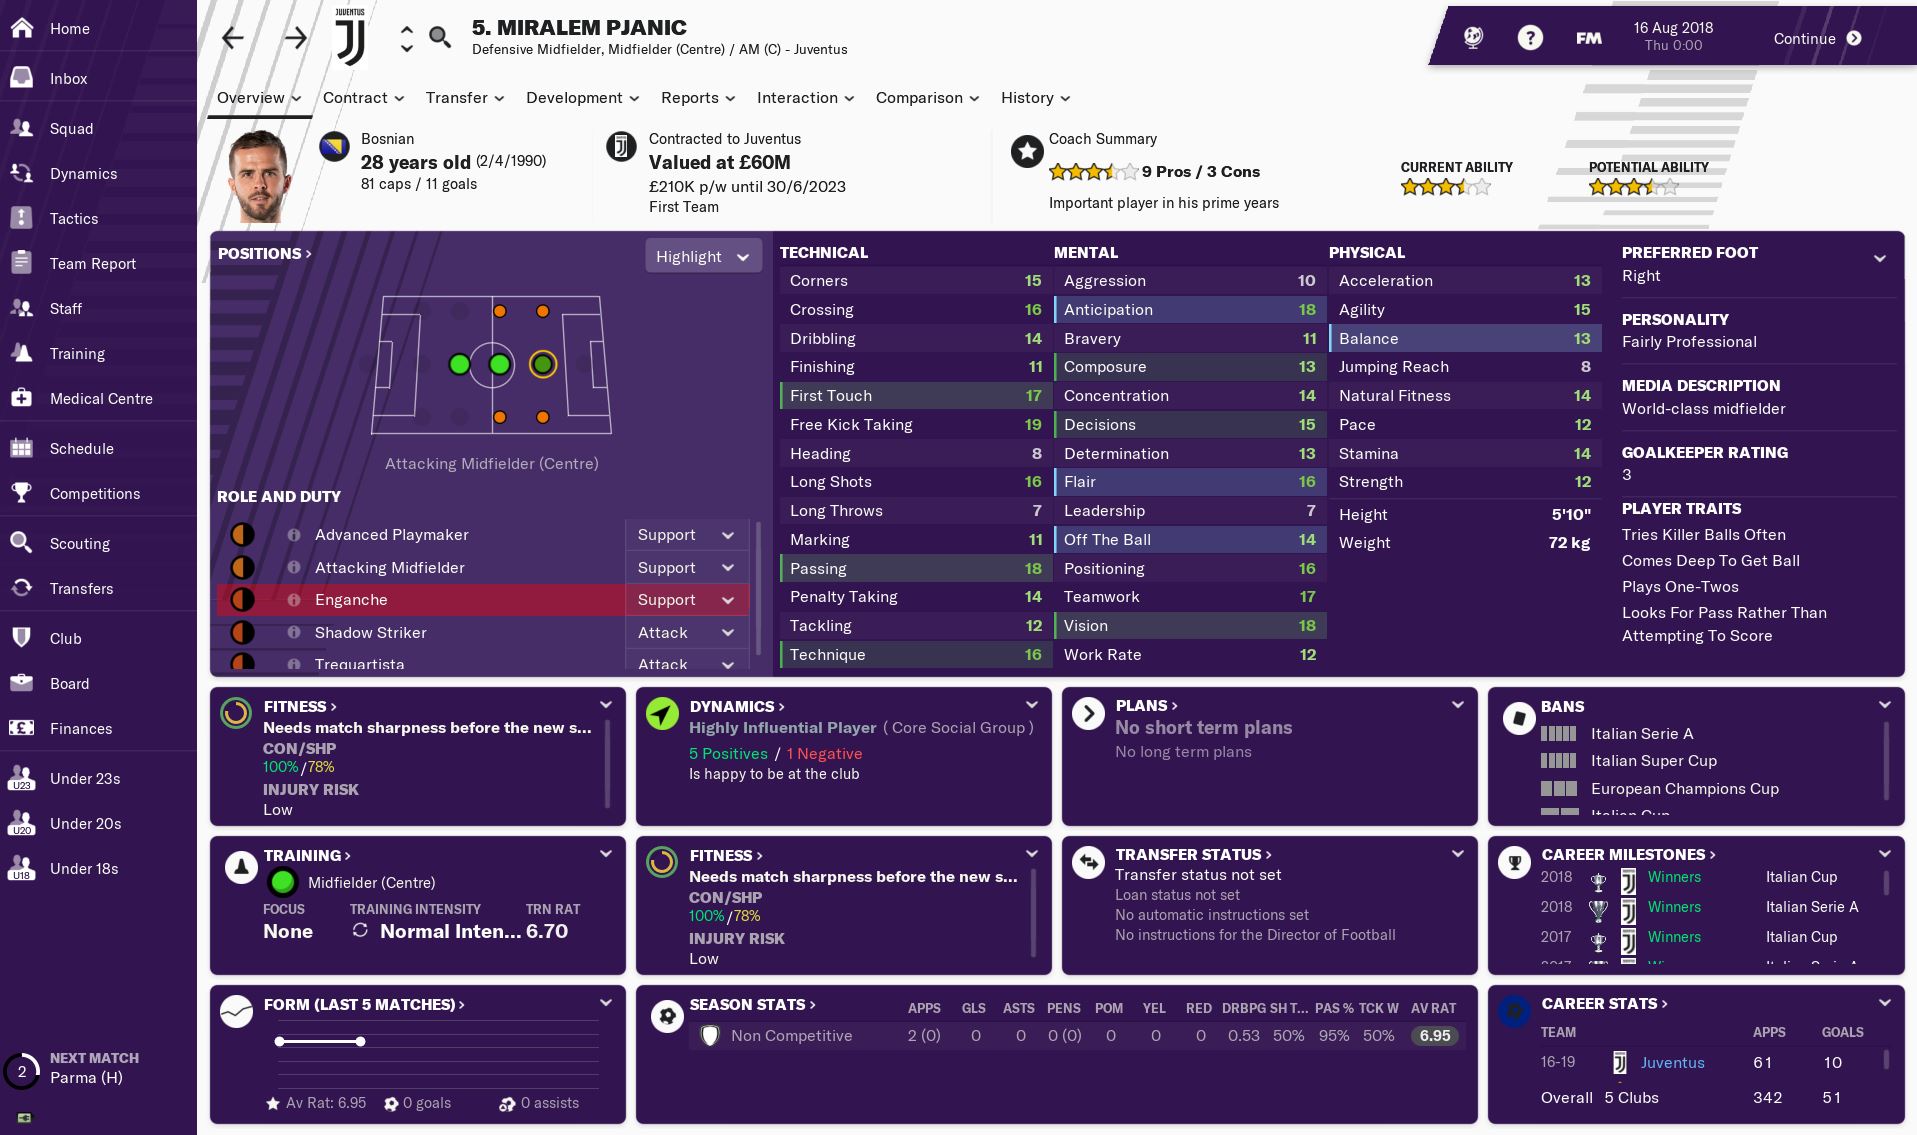 Miralem Pjanic's profile in Football Manager 2019